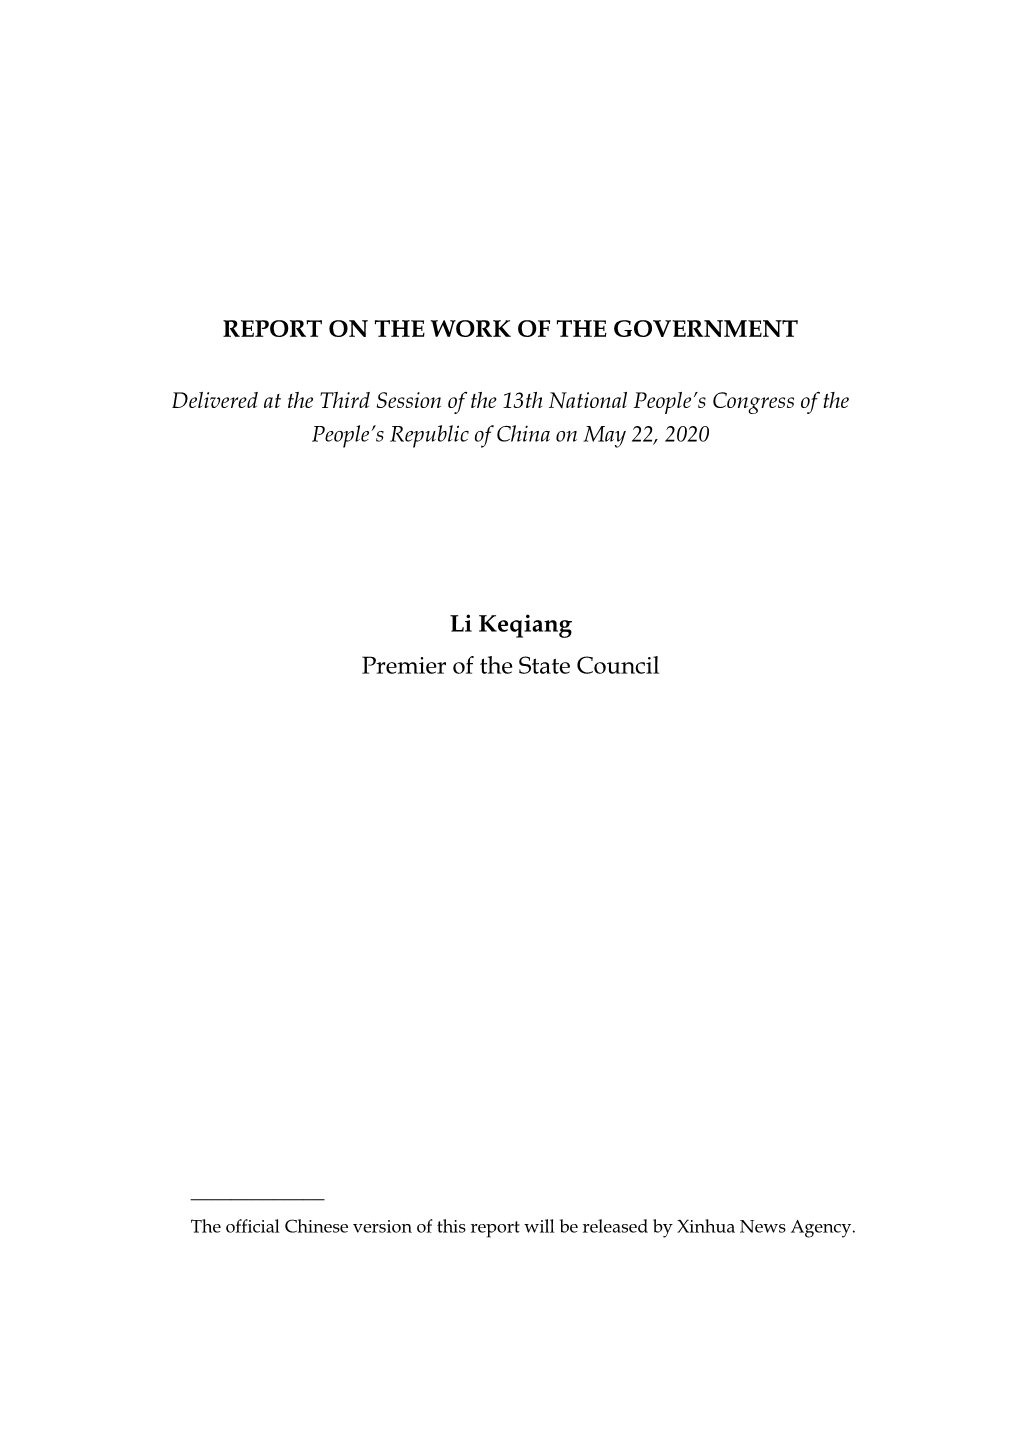 REPORT on the WORK of the GOVERNMENT Li Keqiang Premier